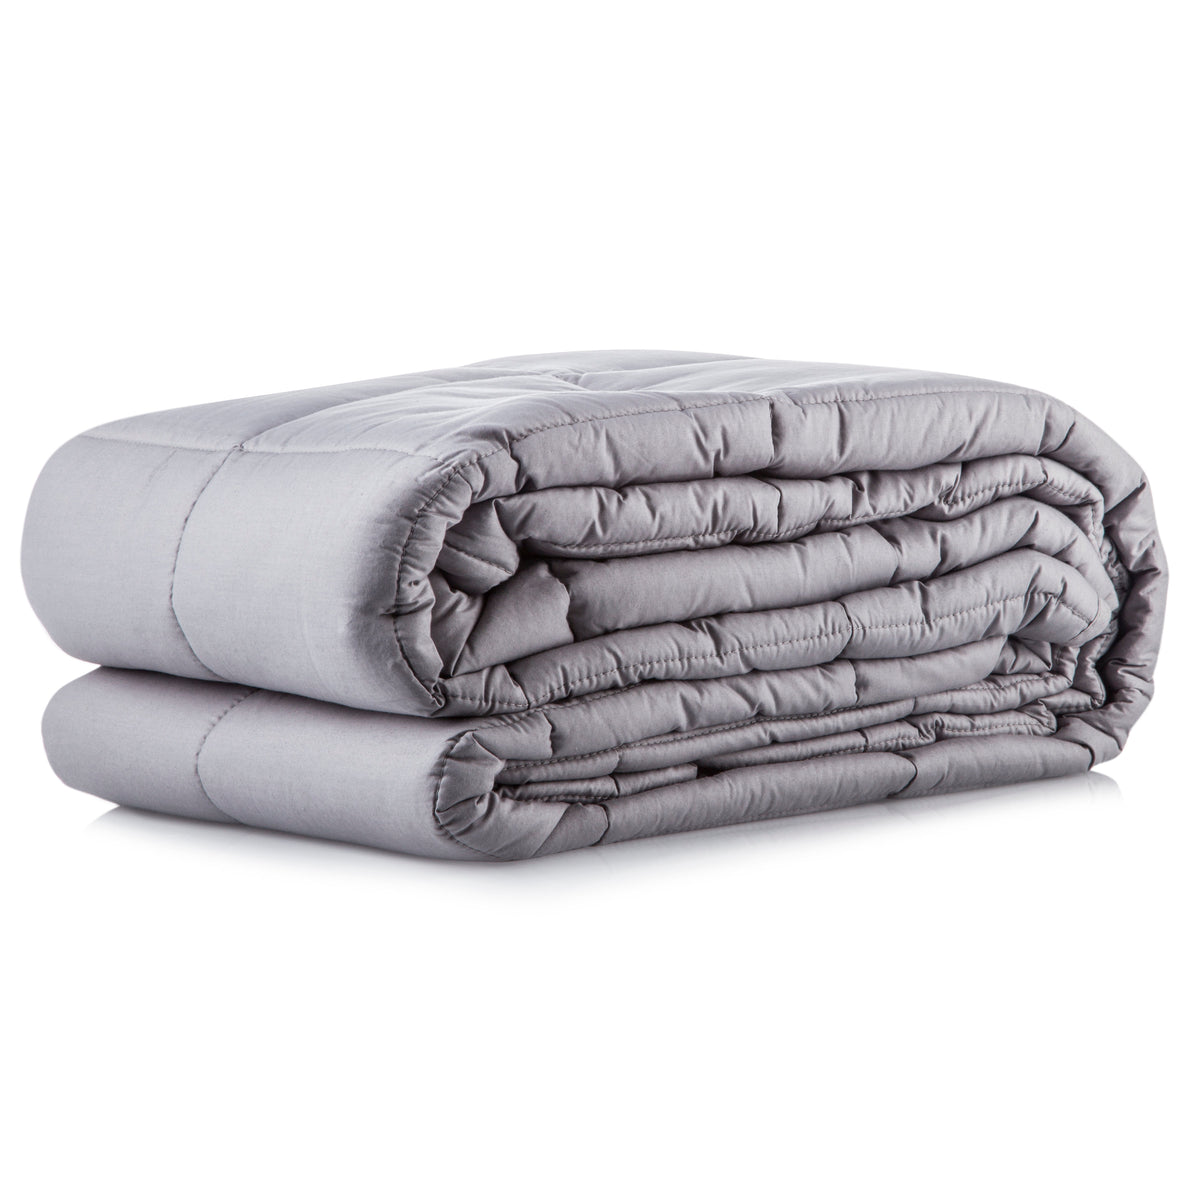 Cooshi Adult Weighted Blanket Queen Size 20 lbs | Cotton 60x80 | Grey